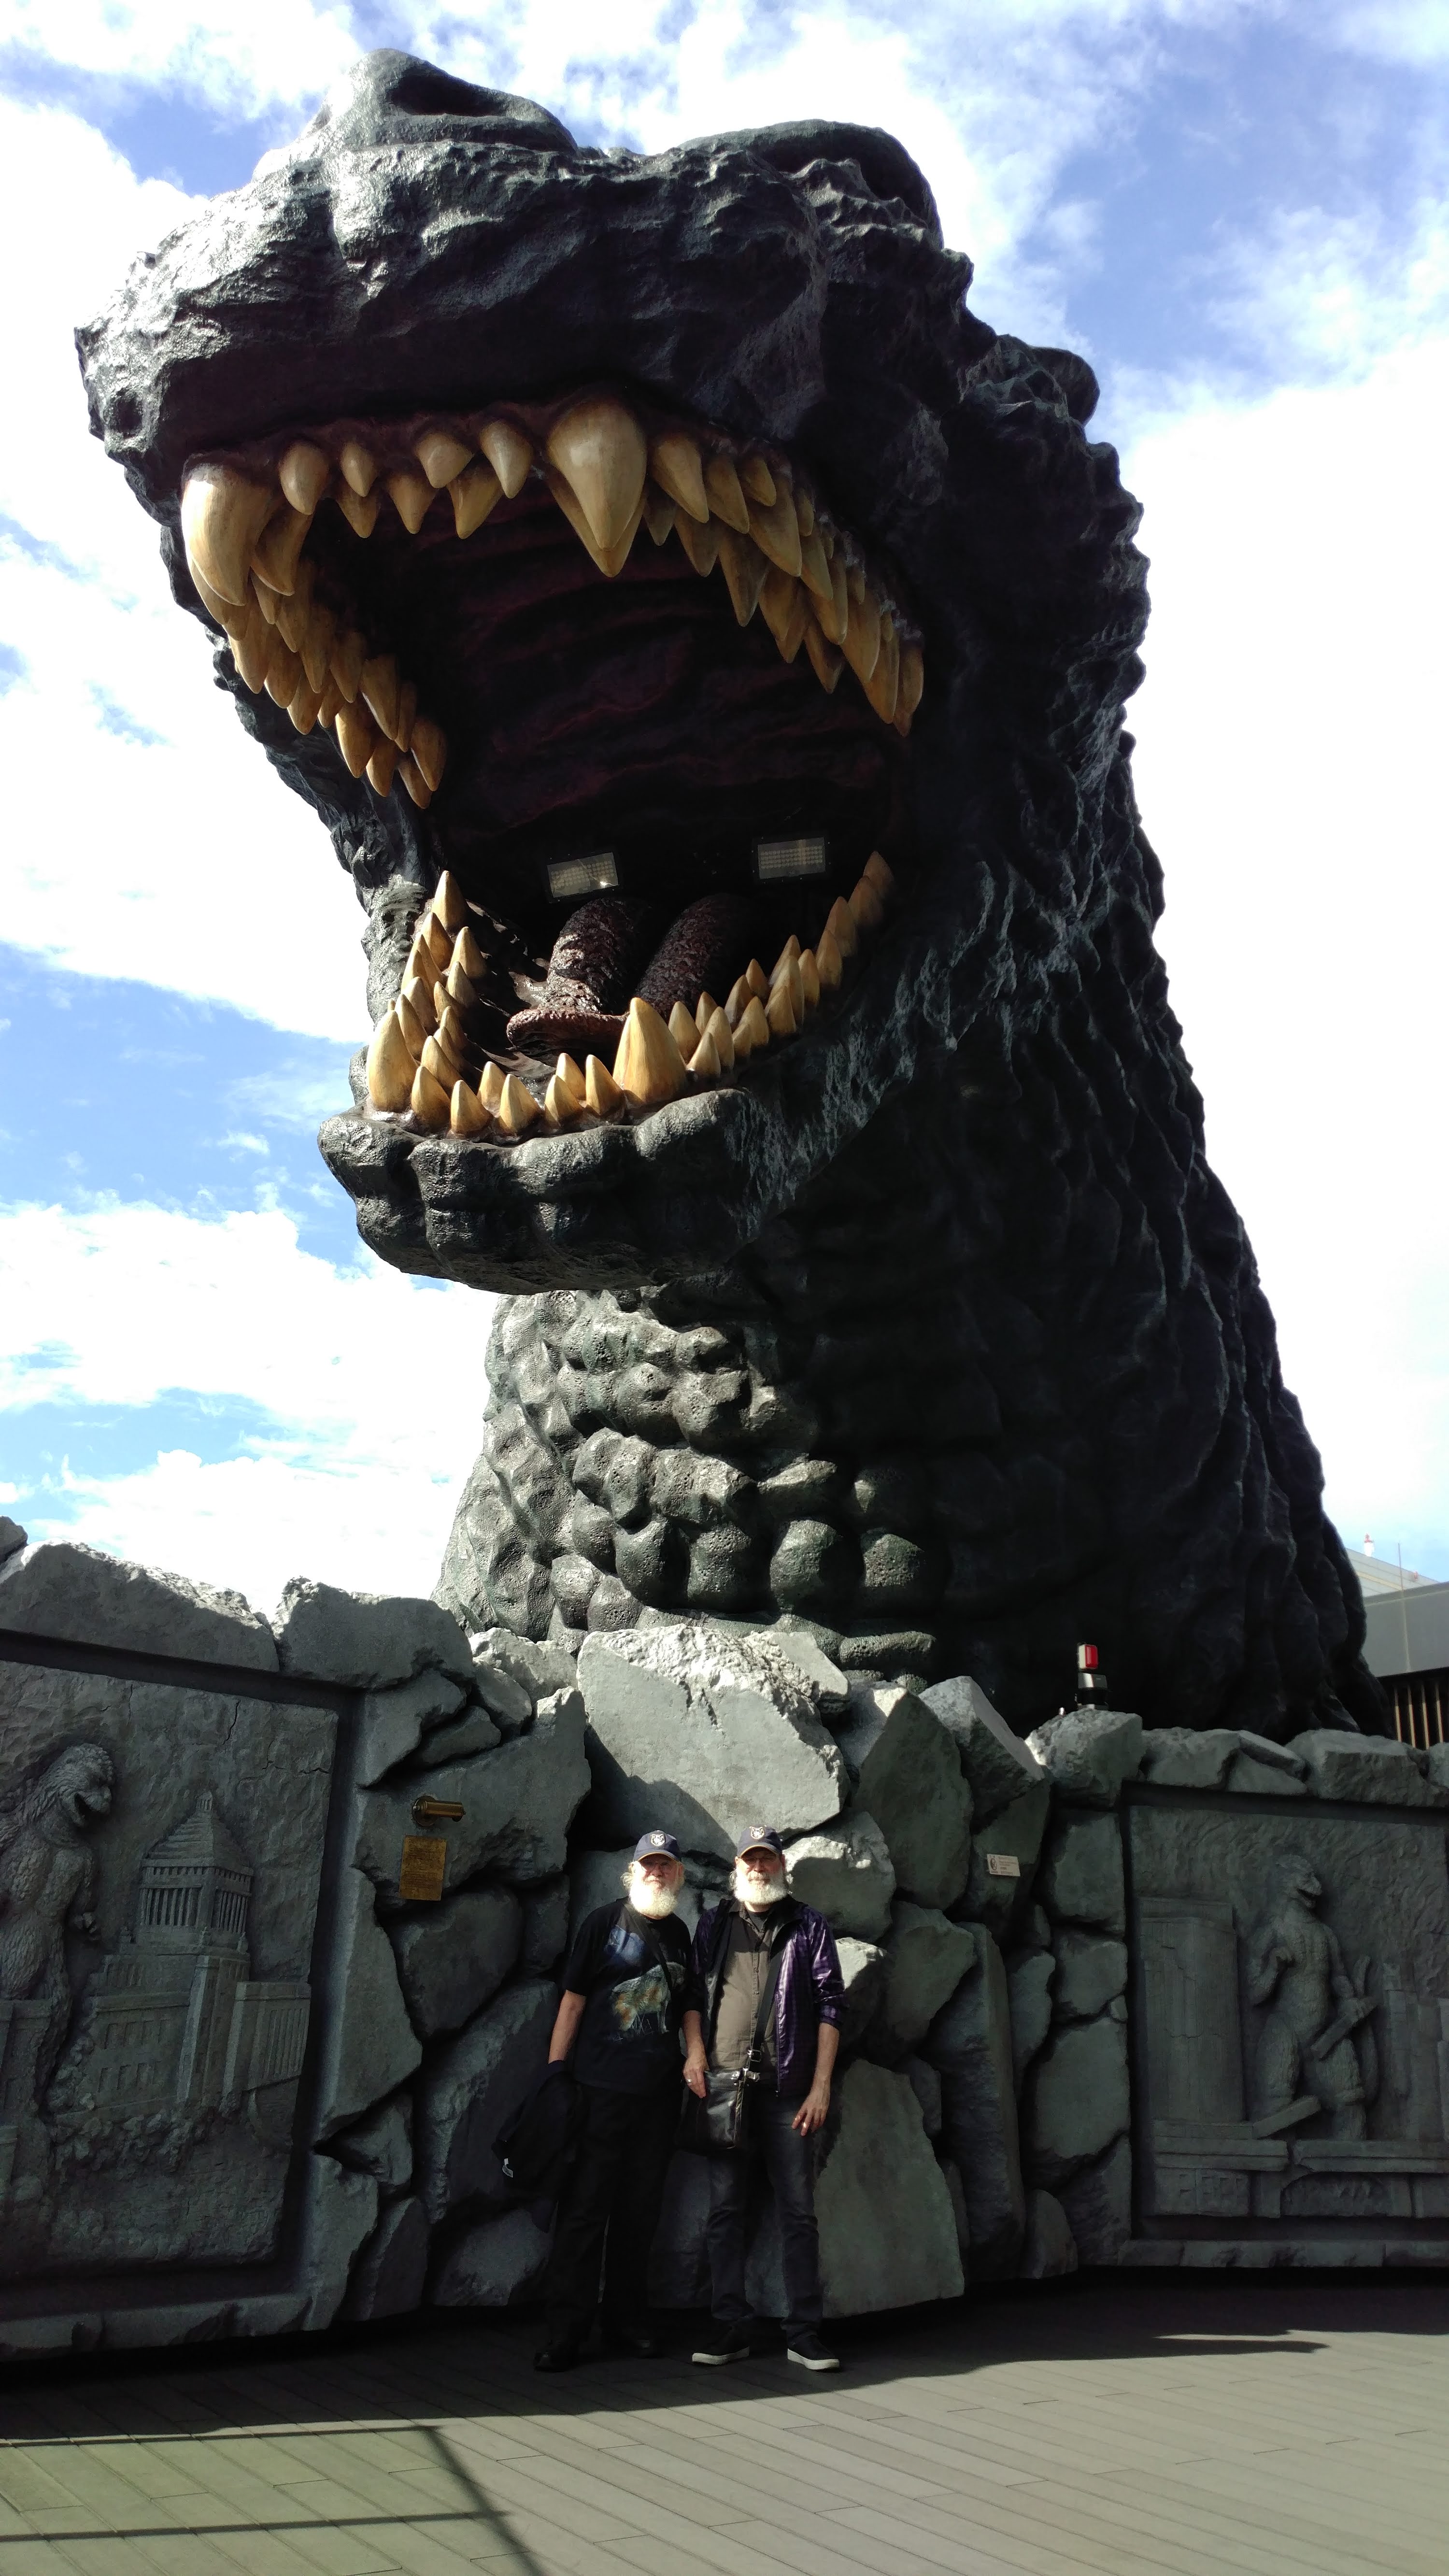 chris and earl with godzilla's head